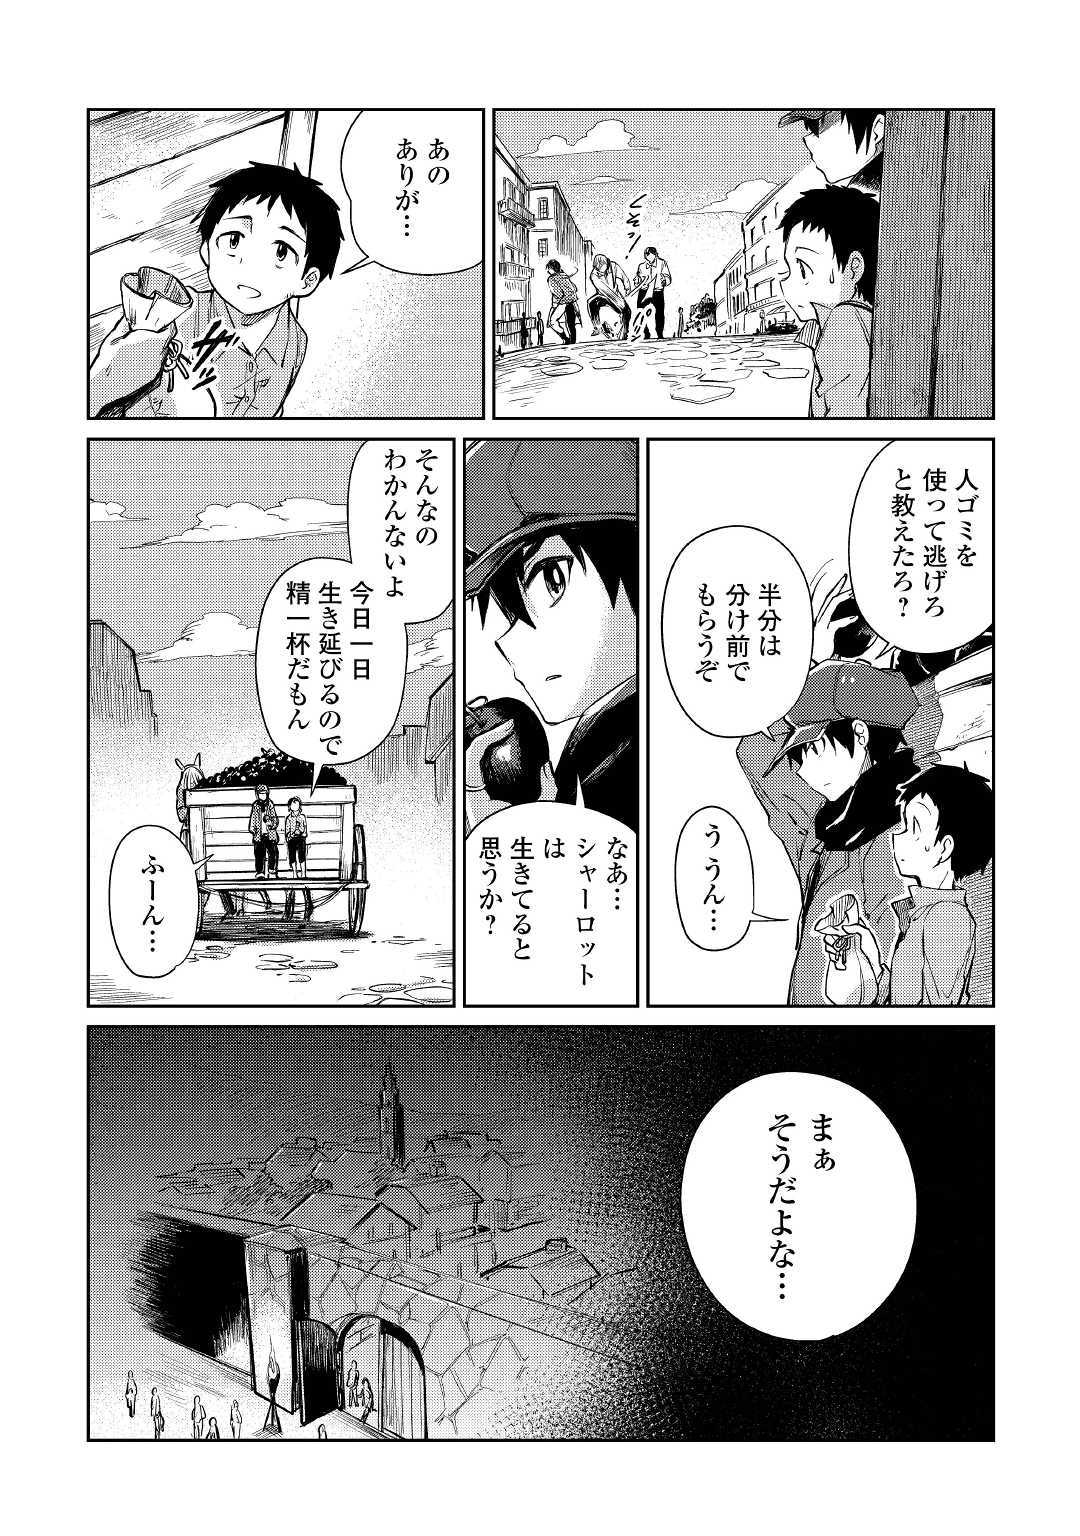 The Former Structural Researcher’s Story of Otherworldly Adventure 第19話 - Page 5